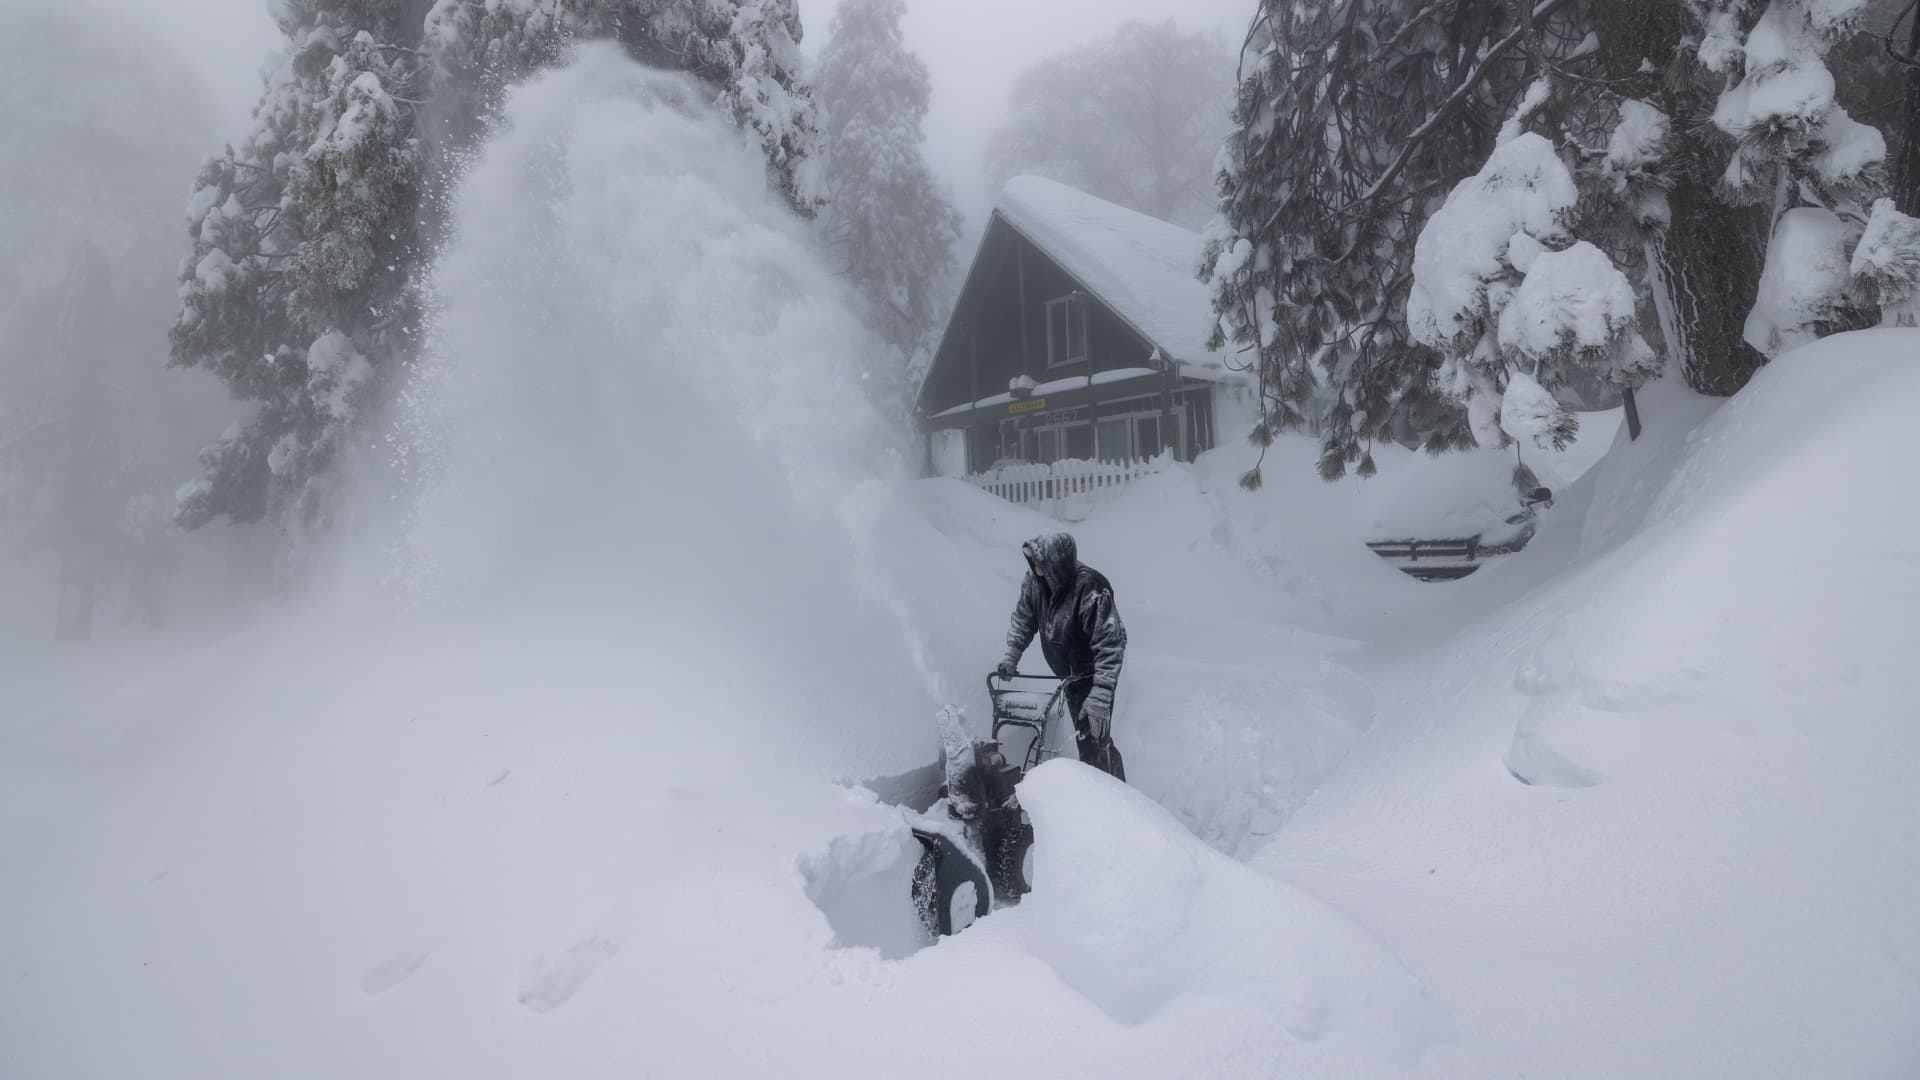 Robert Hallmark, who says that this is the worst snowstorm of his 31 years living here, clears snow at his home as residents throughout the San Bernardino Mountains continue to be trapped in their homes by snow on March 1, 2023 in Running Springs, California.